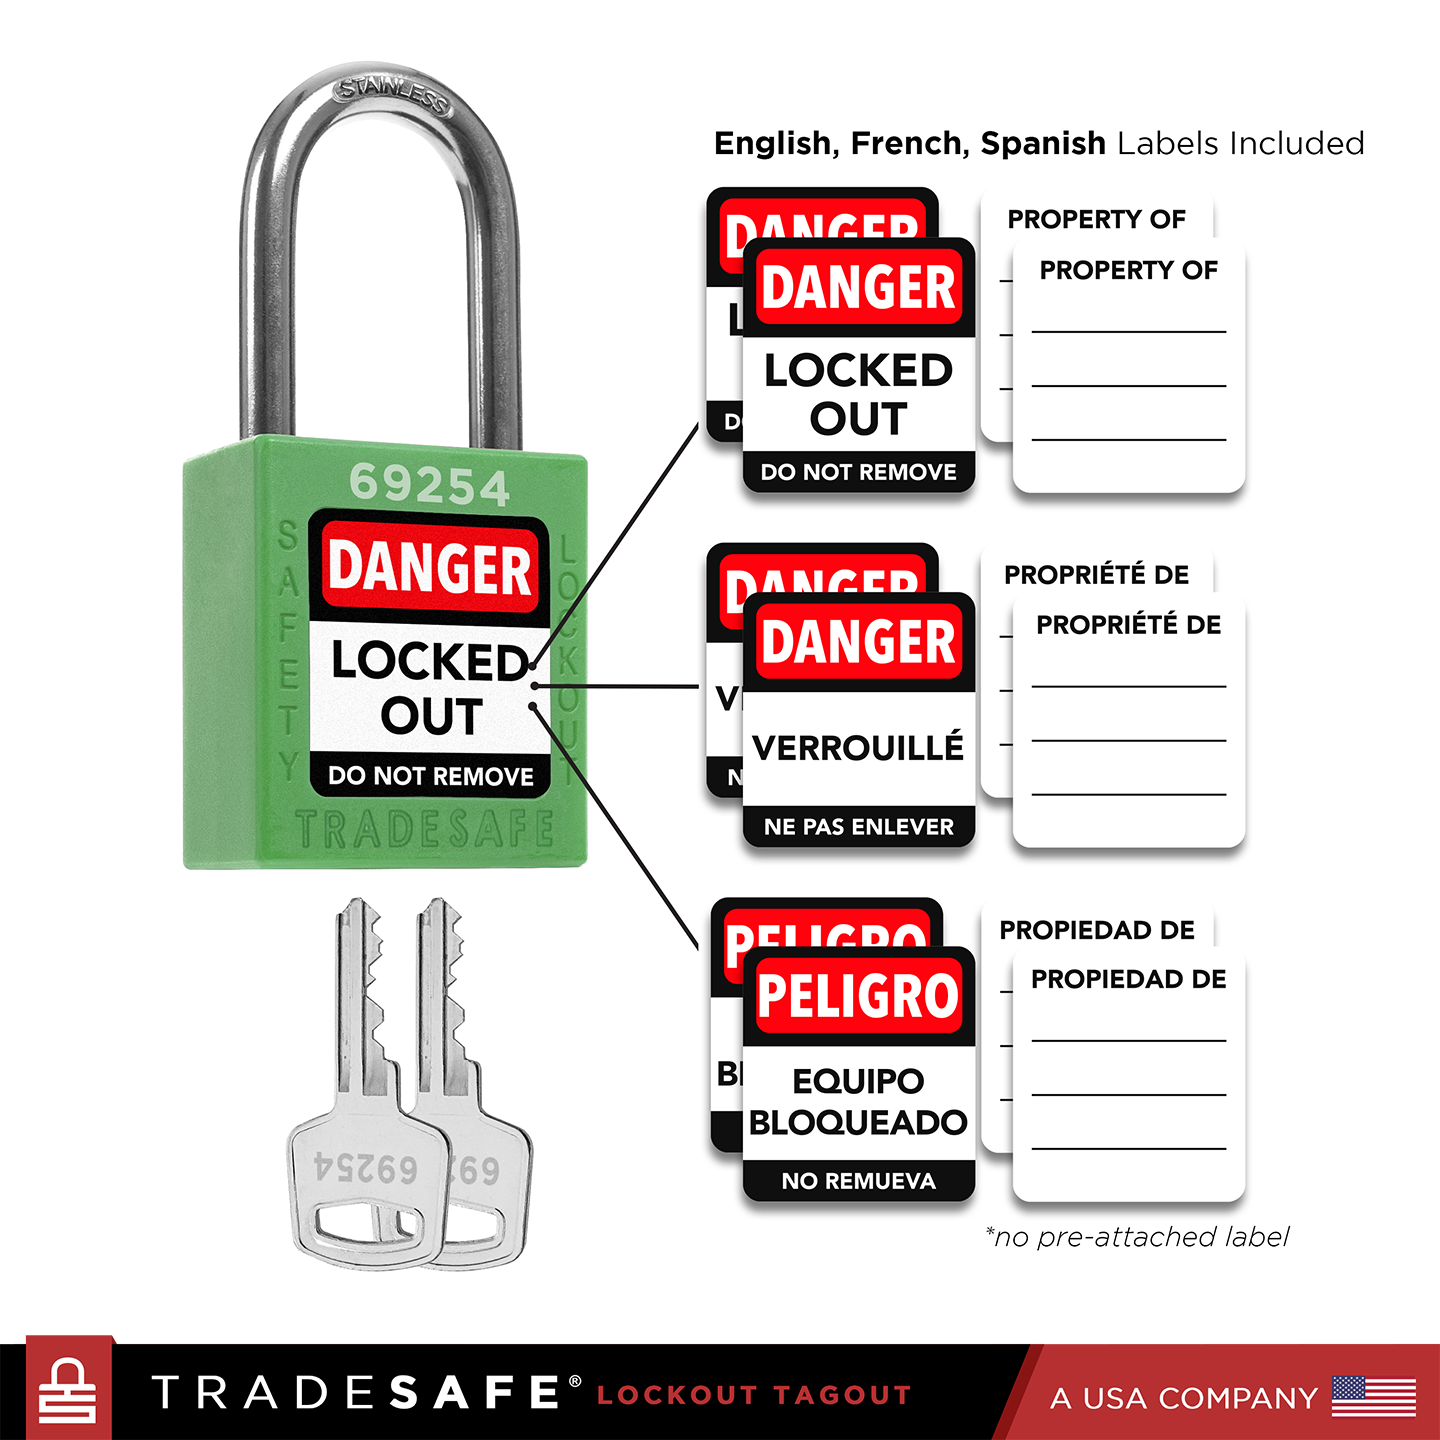 infographic: green loto lock with english, french, spanish labels included